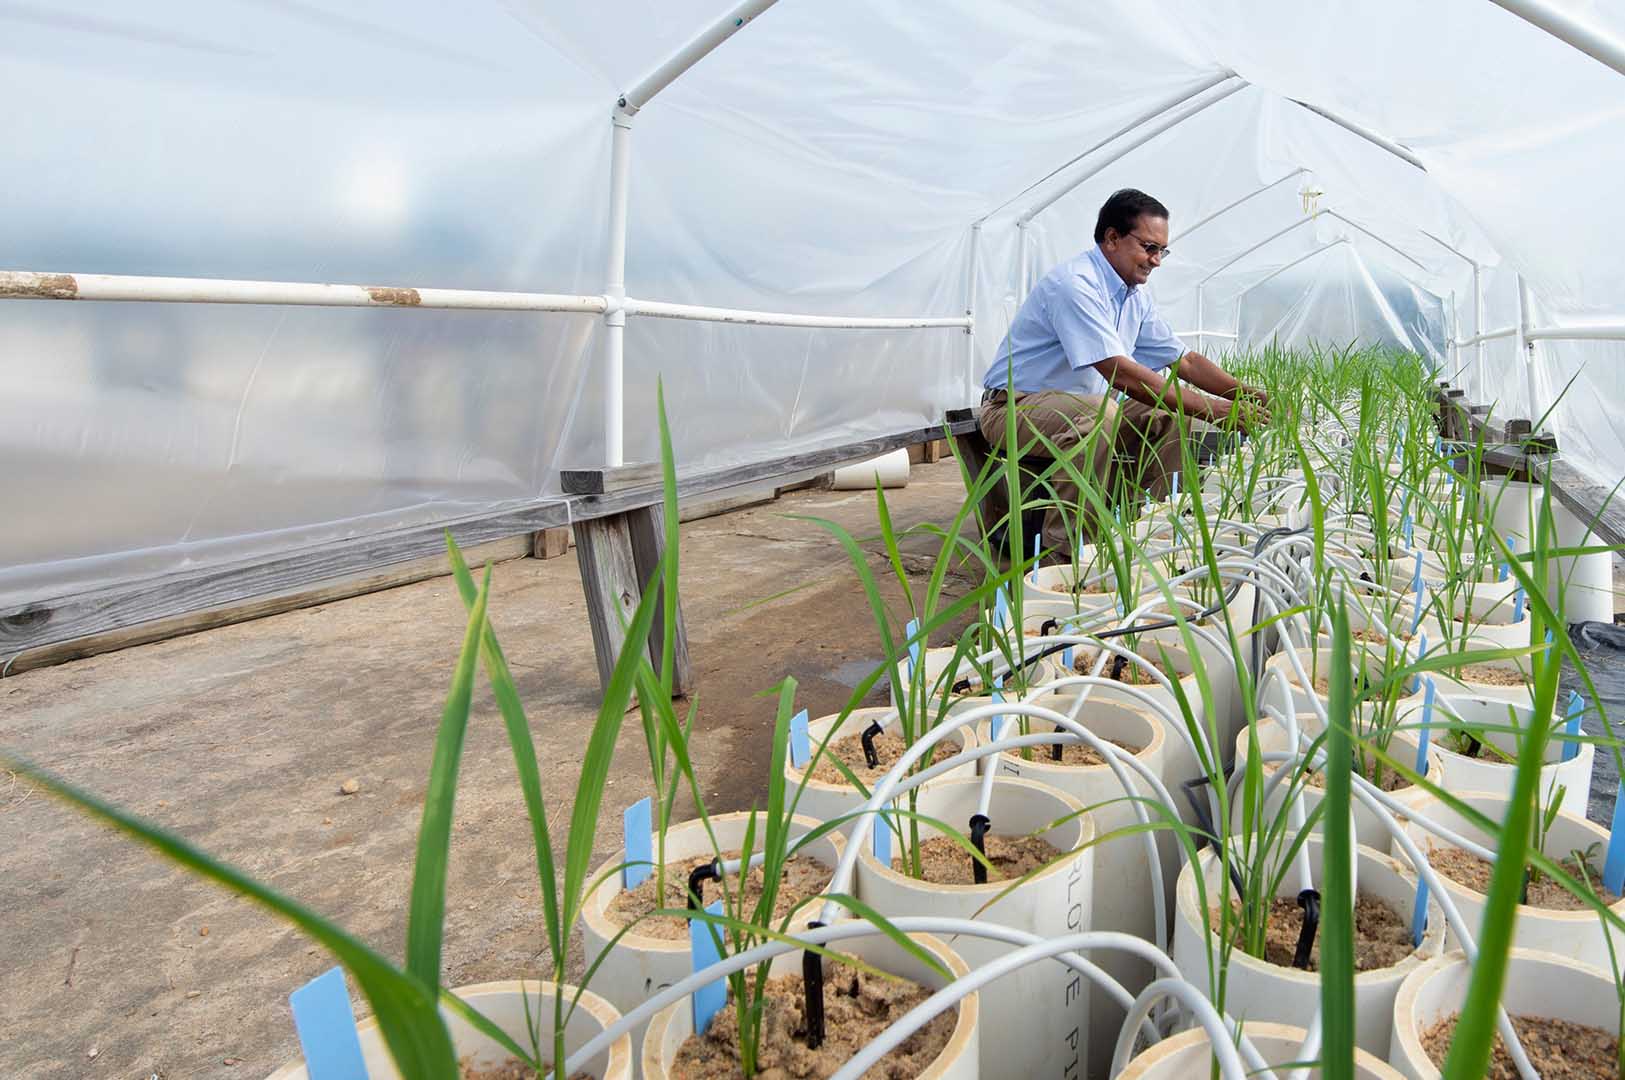 Dr. Raja Reddy works on rice plants in a greenhouse structure at the Soil-Plant-Atmosphere Research unit. (Photo by Meagan Bean)